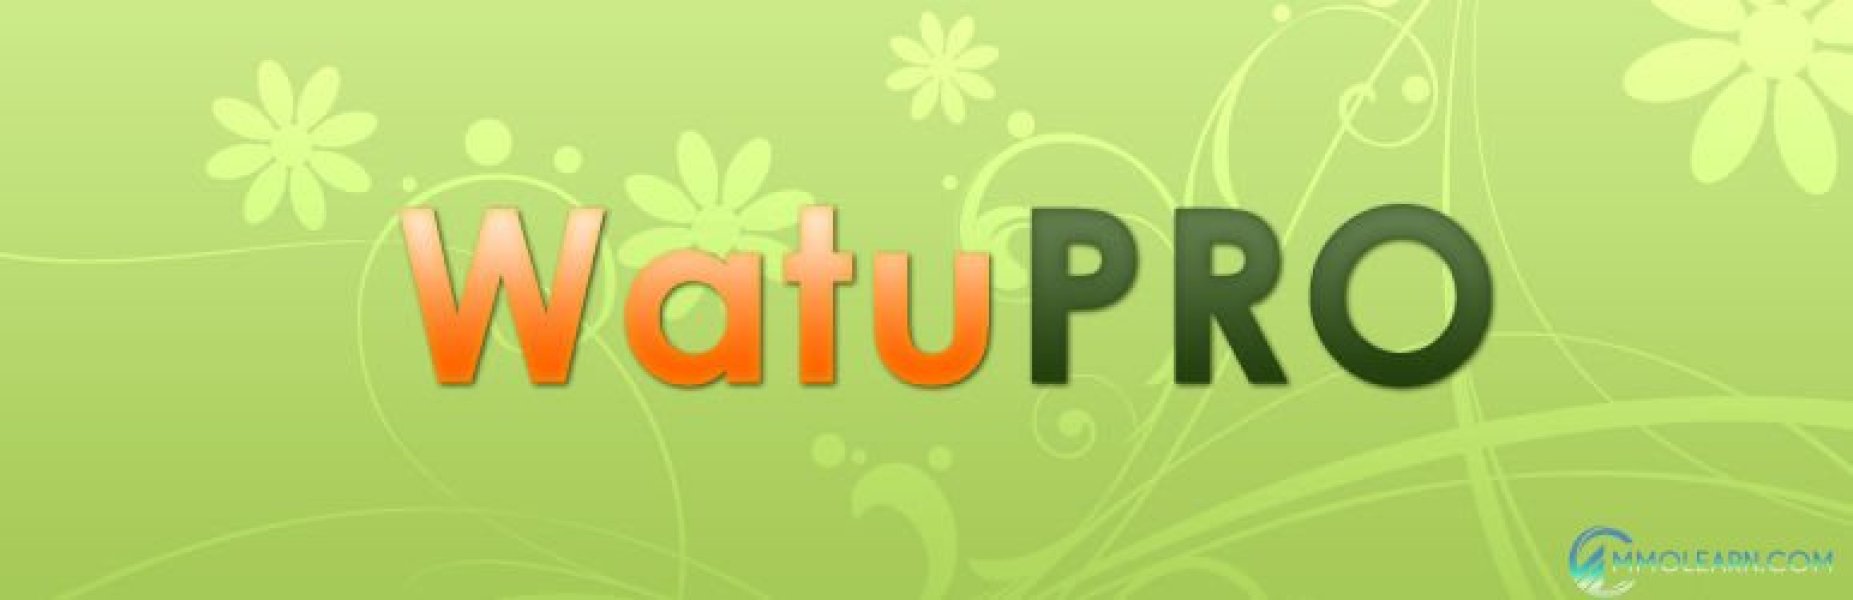 WatuPRO - Create Exams Tests and Quizzes